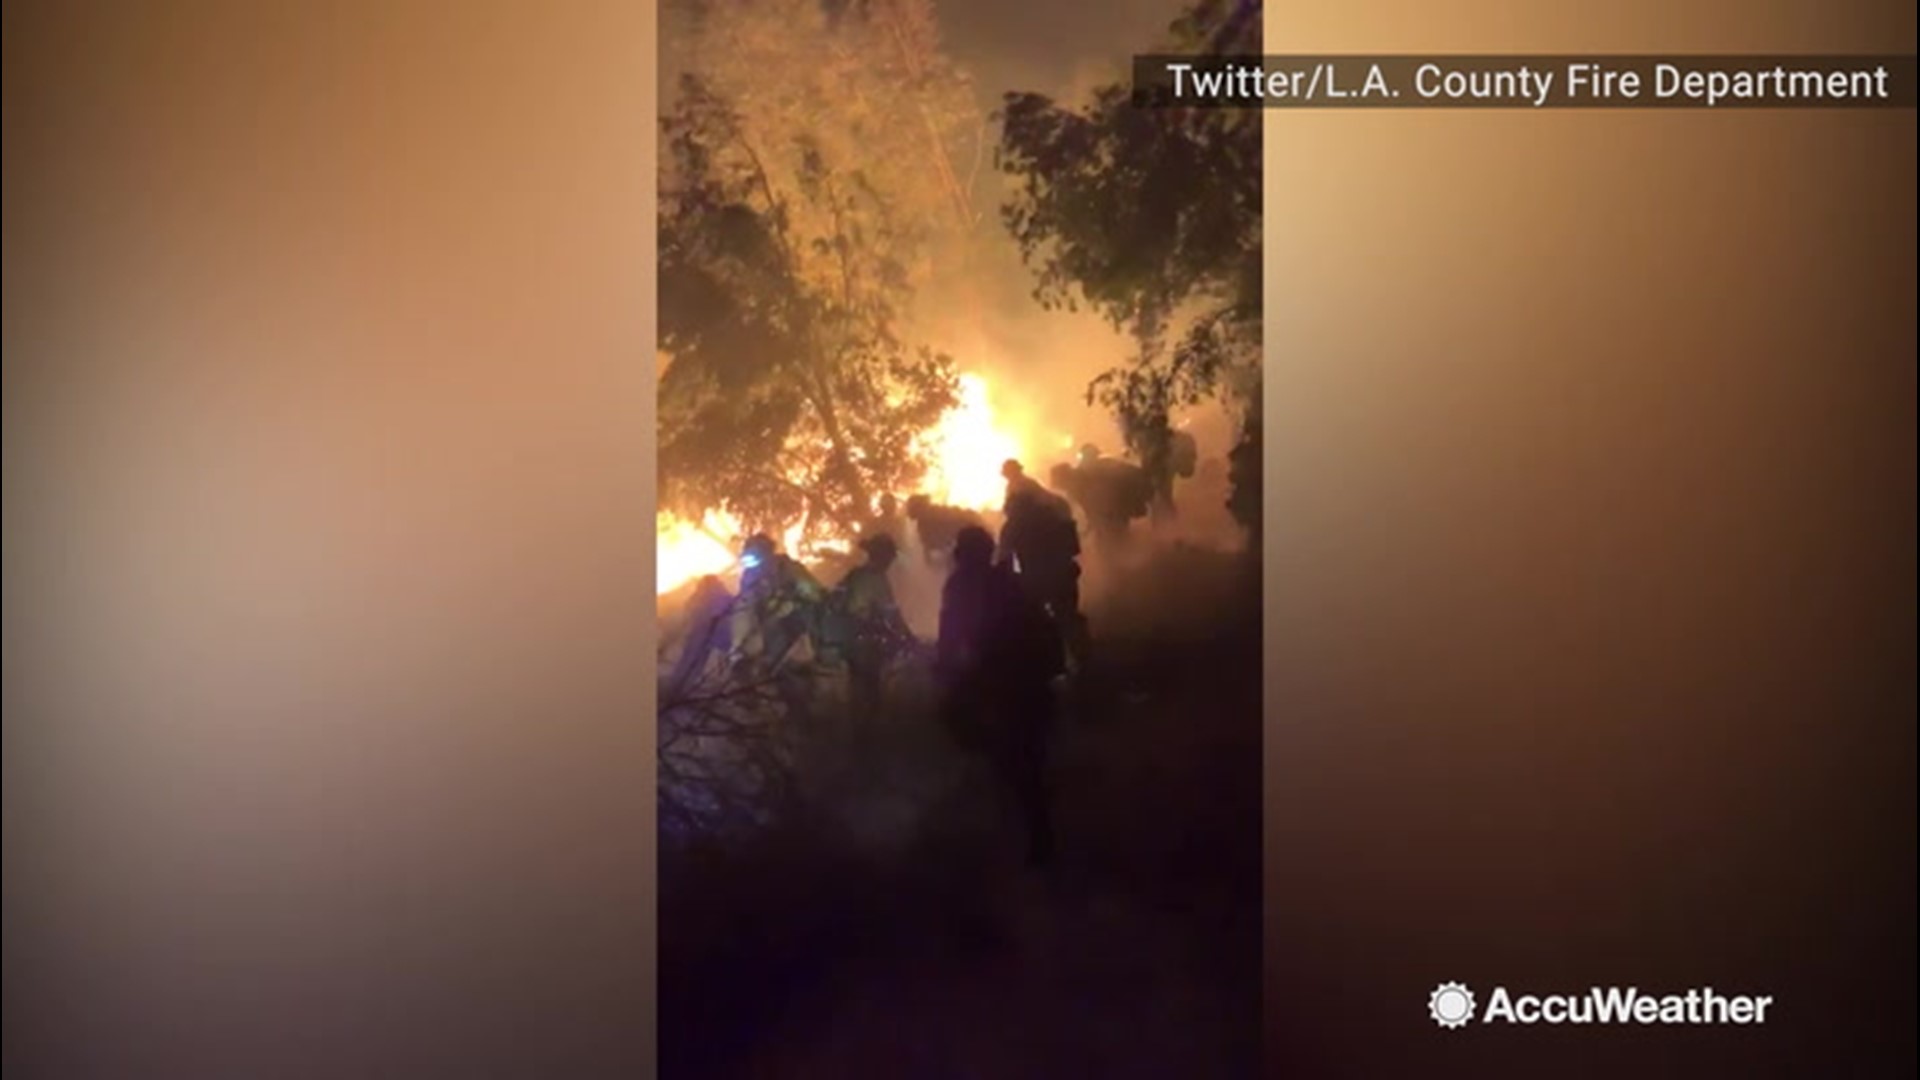 Strong Santa Ana winds proved challenging for firefighters as they went all-out to clear brush to try to impede the growth of the rapidly growing blaze on Oct. 11.